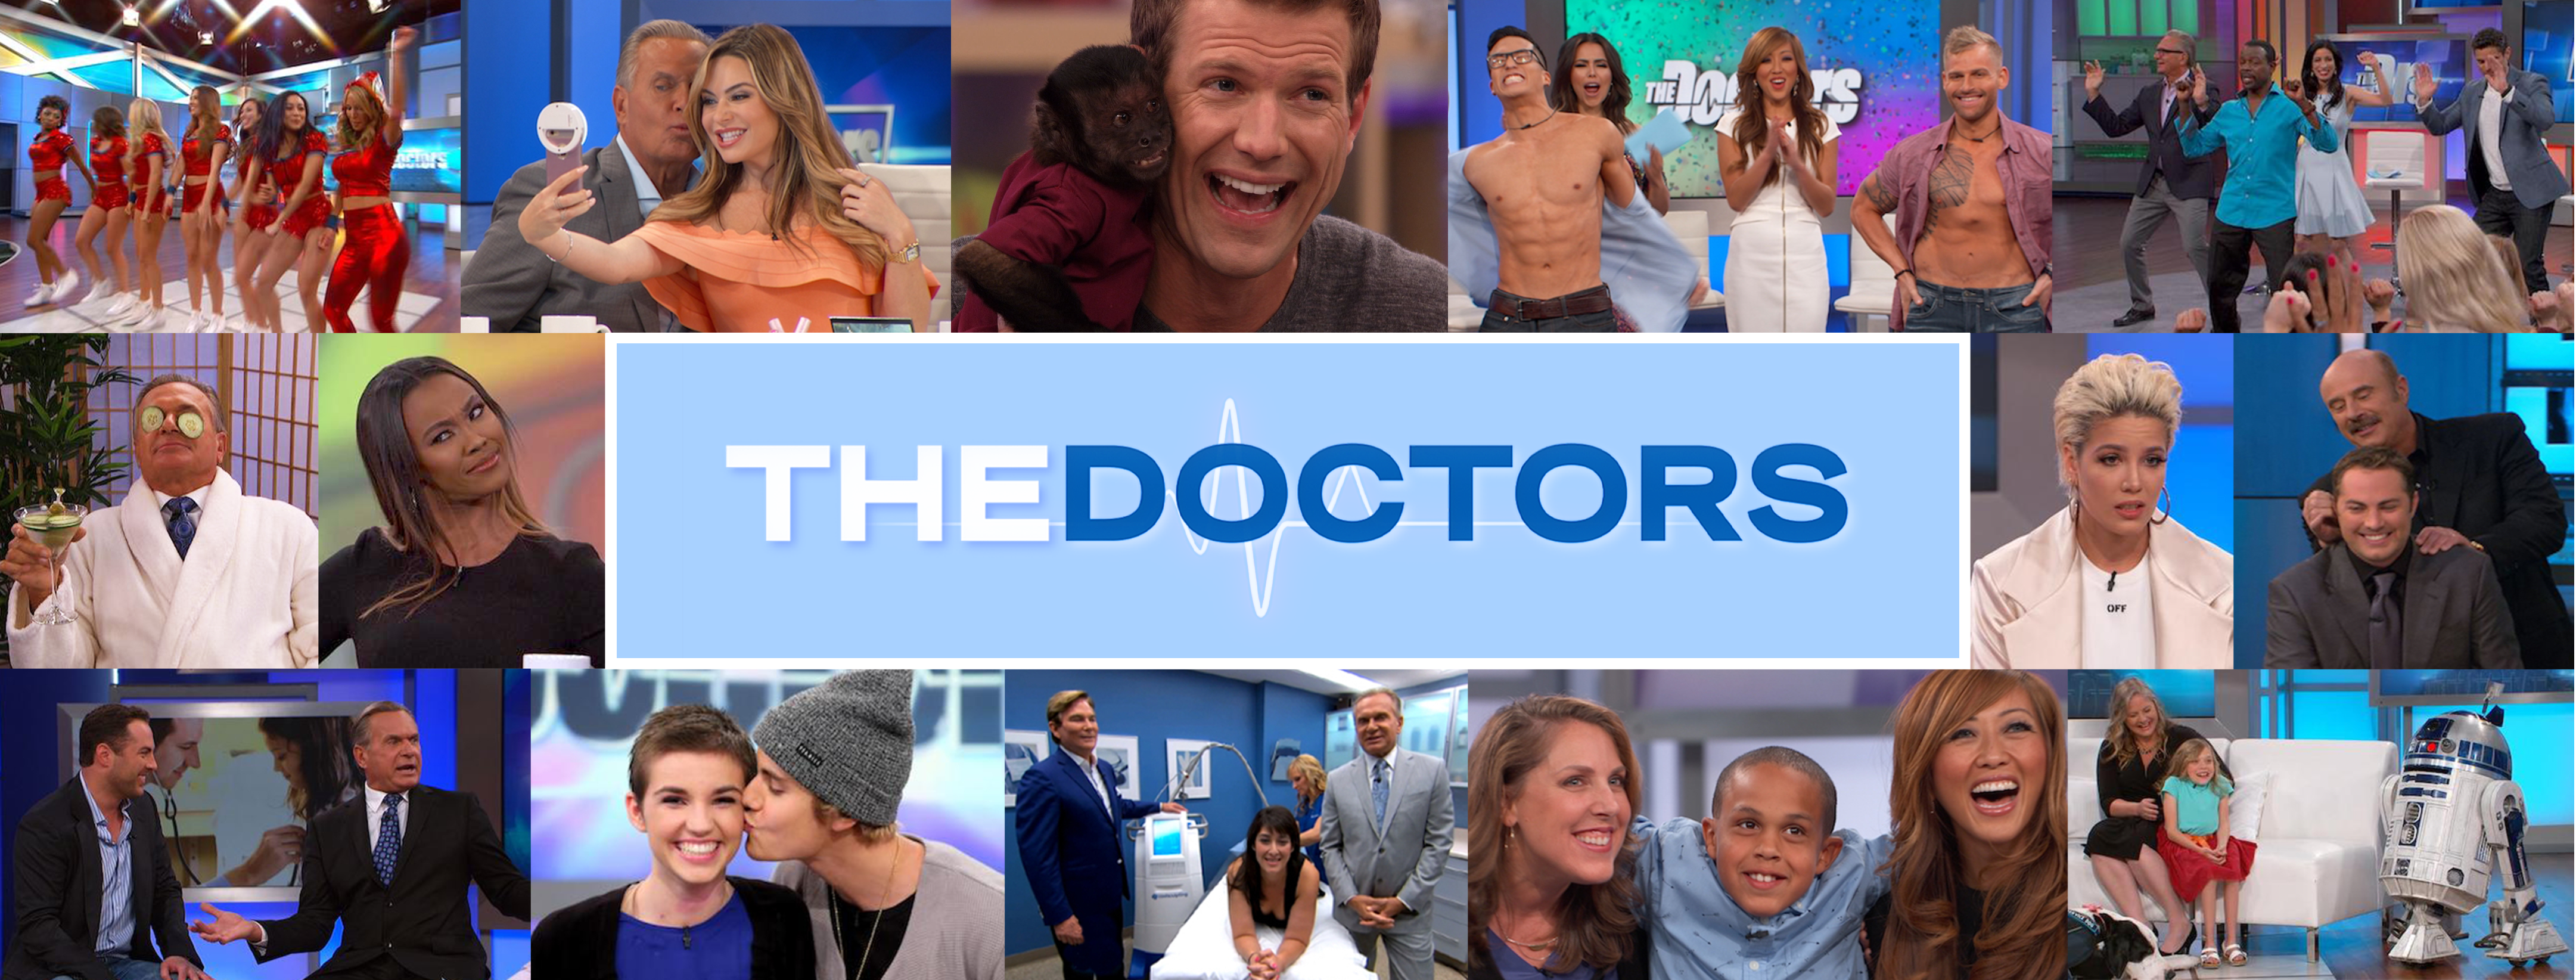 Samantha Harris and The Doctors